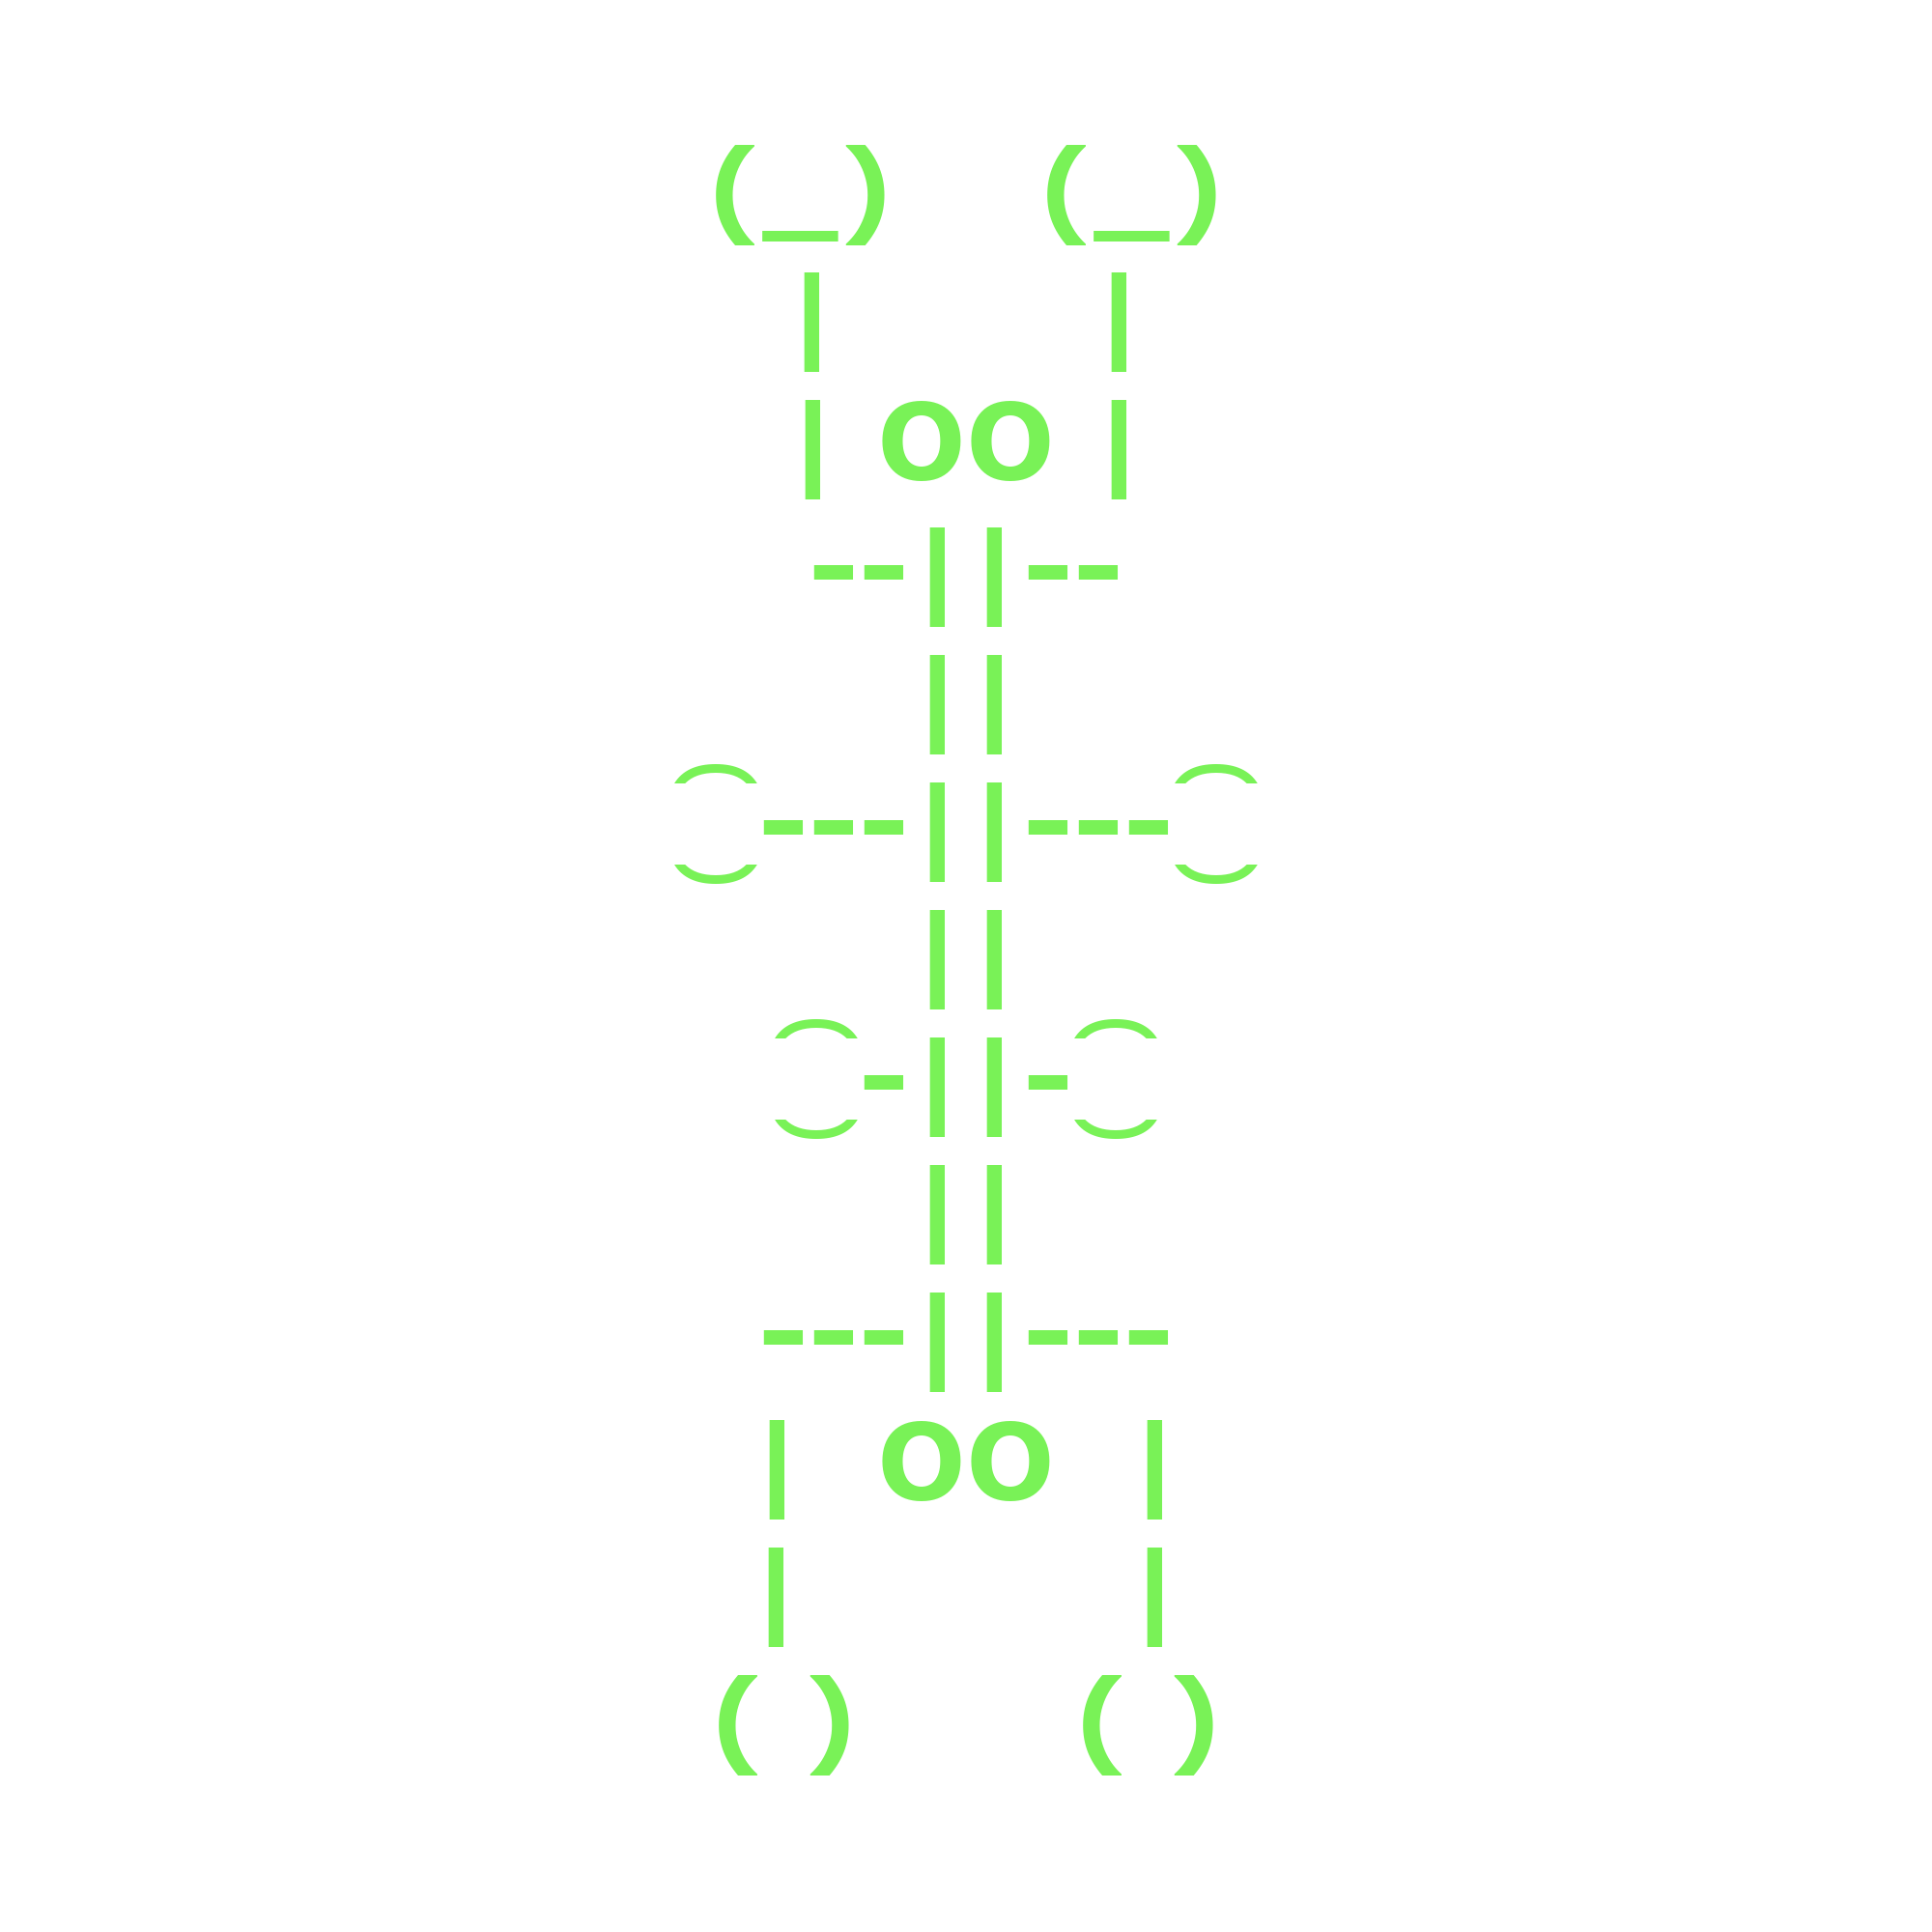 Hacker Town logo in ASCII art. Rendered as image to force correct visualization.